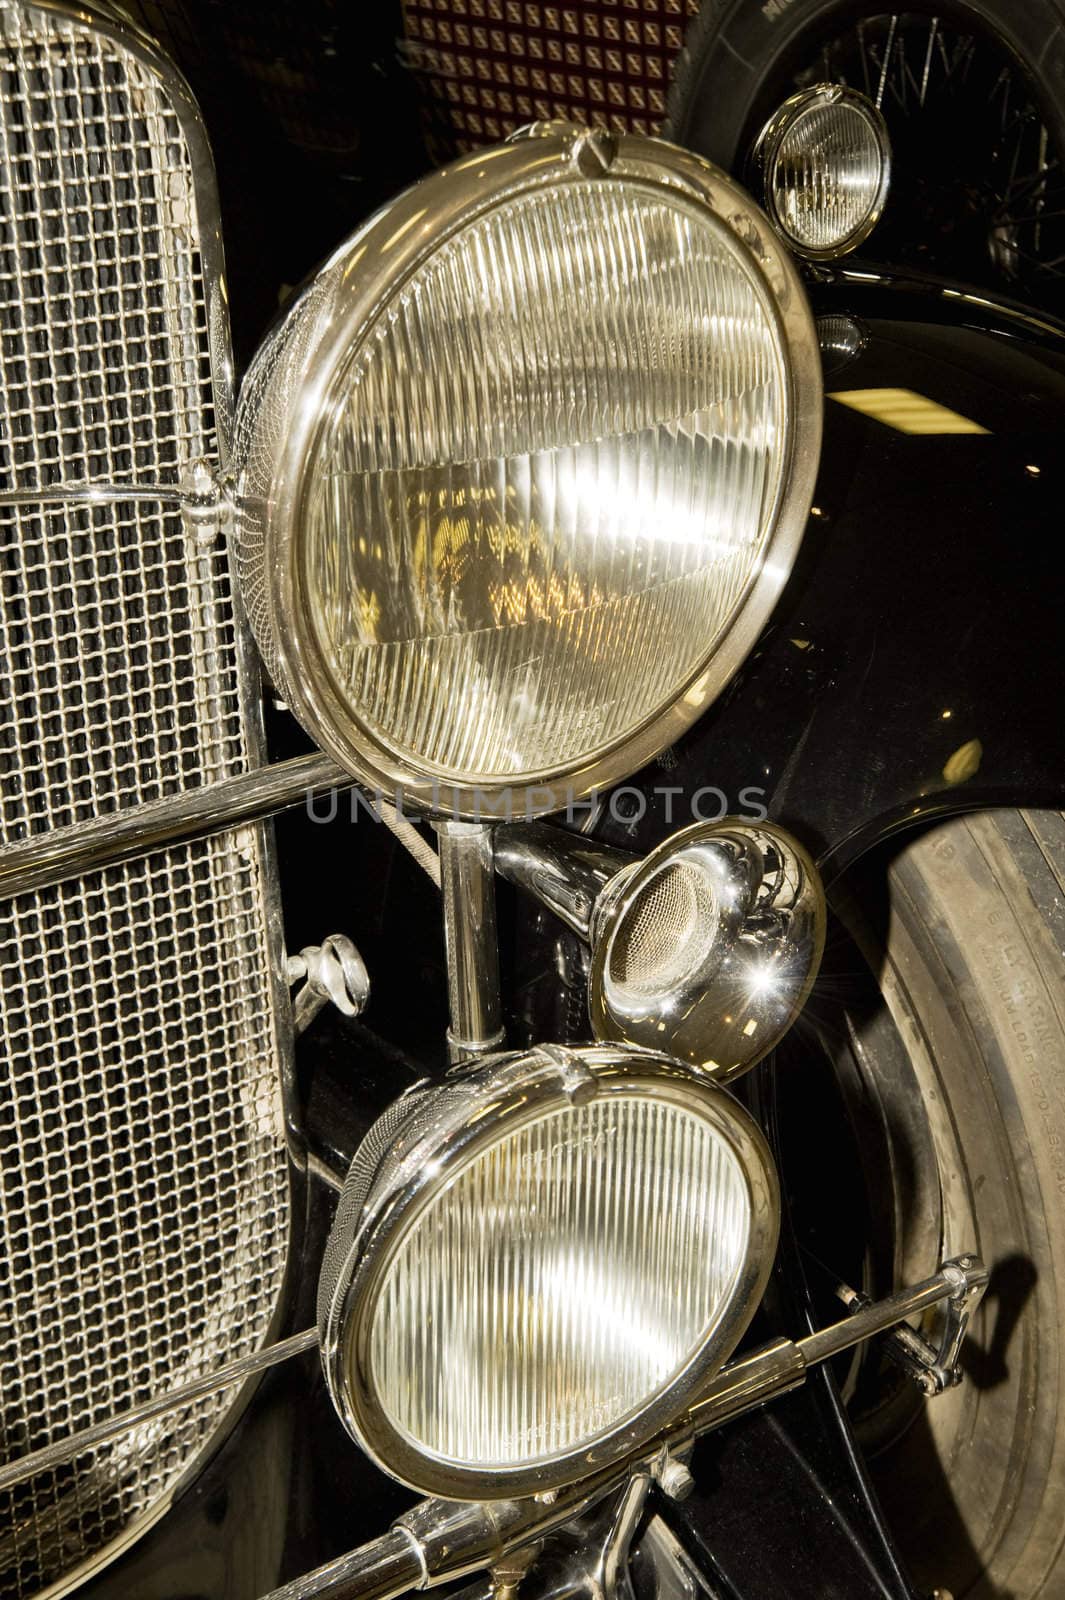 The old automobile headlight taken as close up